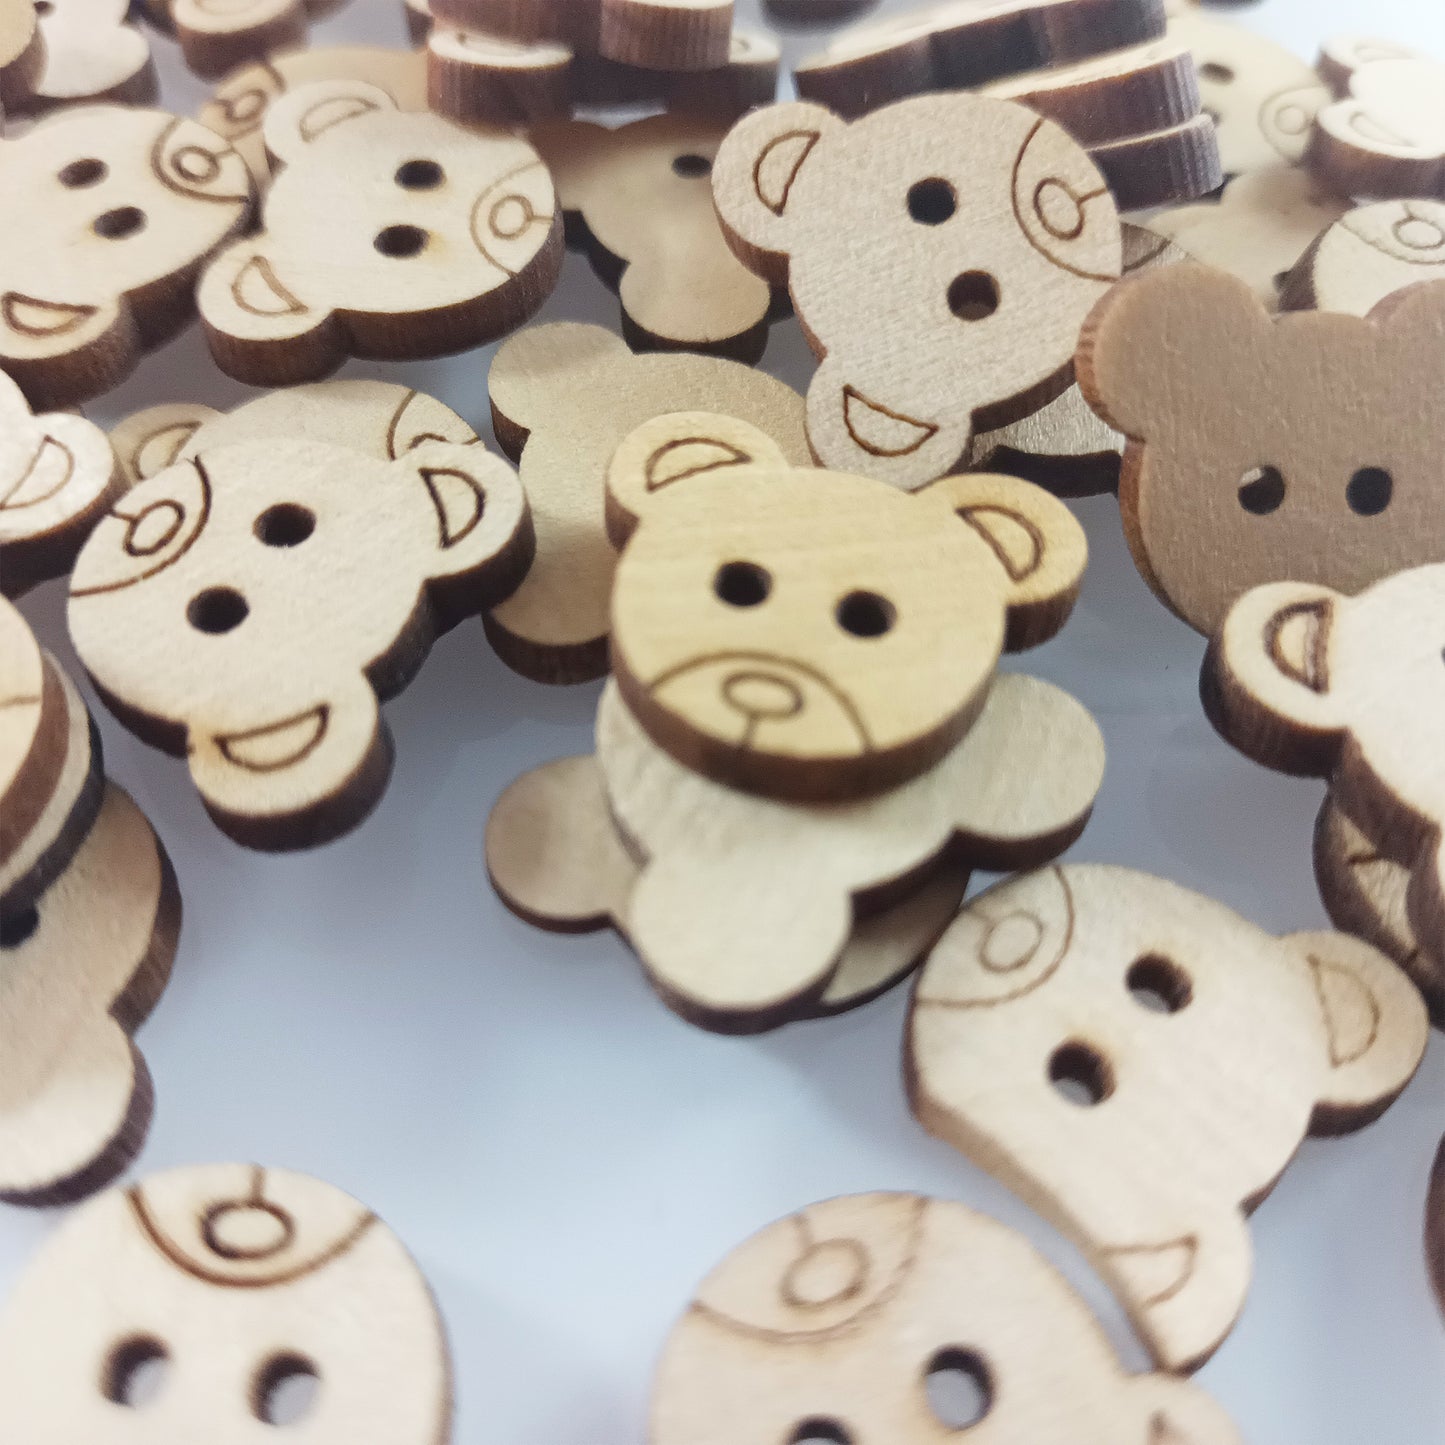 50pcs 19mm Teddy Bear Clothing Wooden Buttons 2 Hole Flatback Sewing Brown